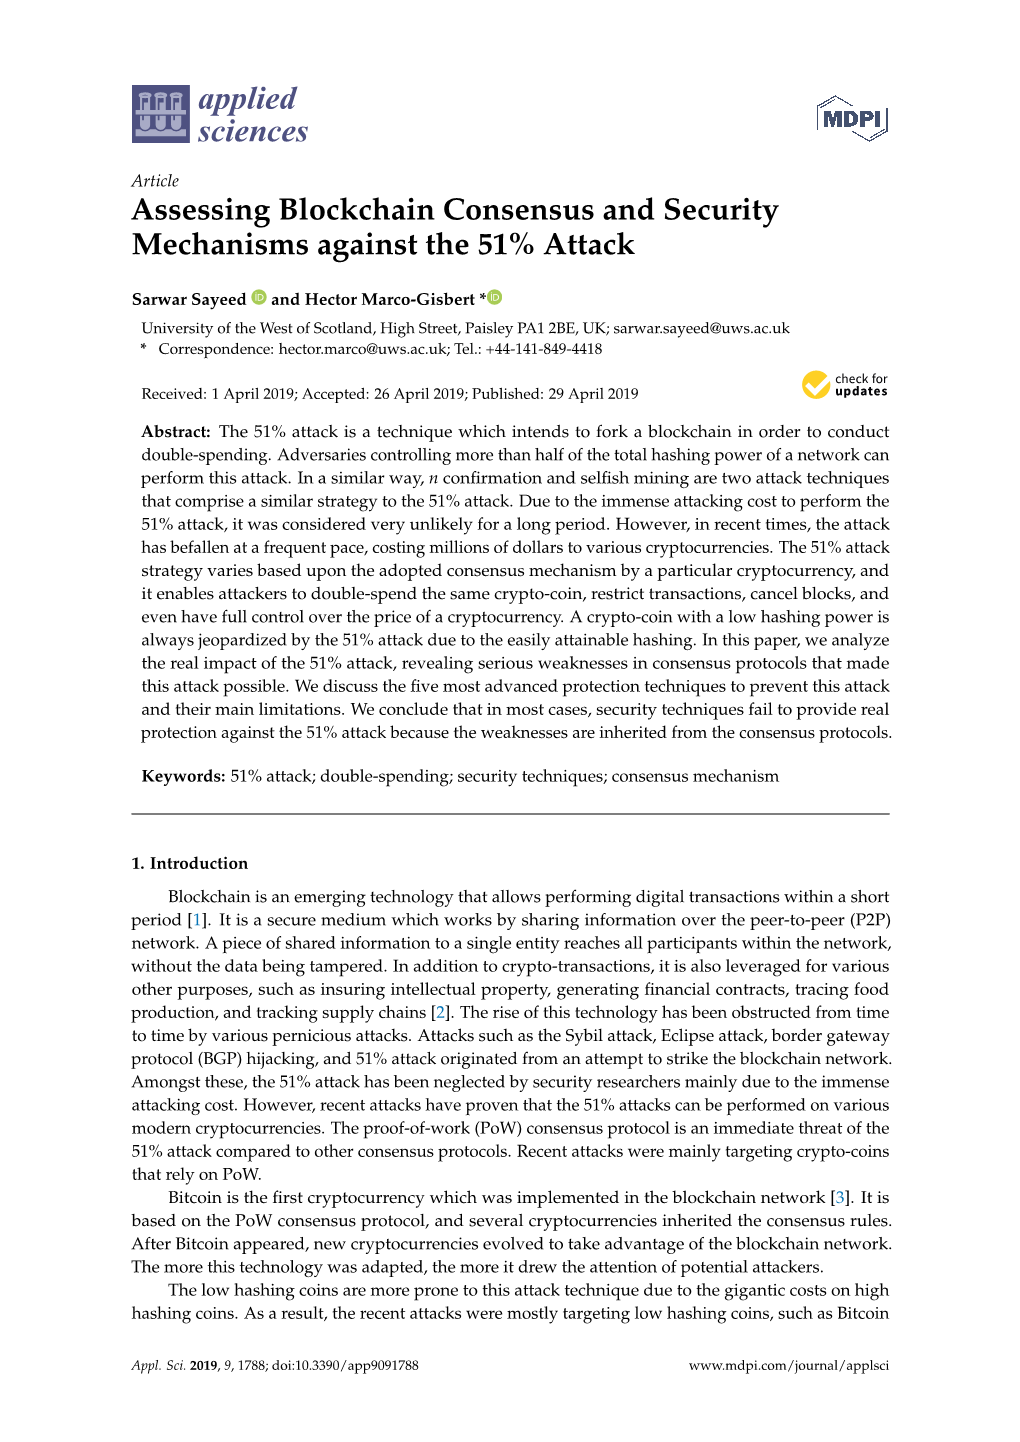 Assessing Blockchain Consensus and Security Mechanisms Against the 51% Attack